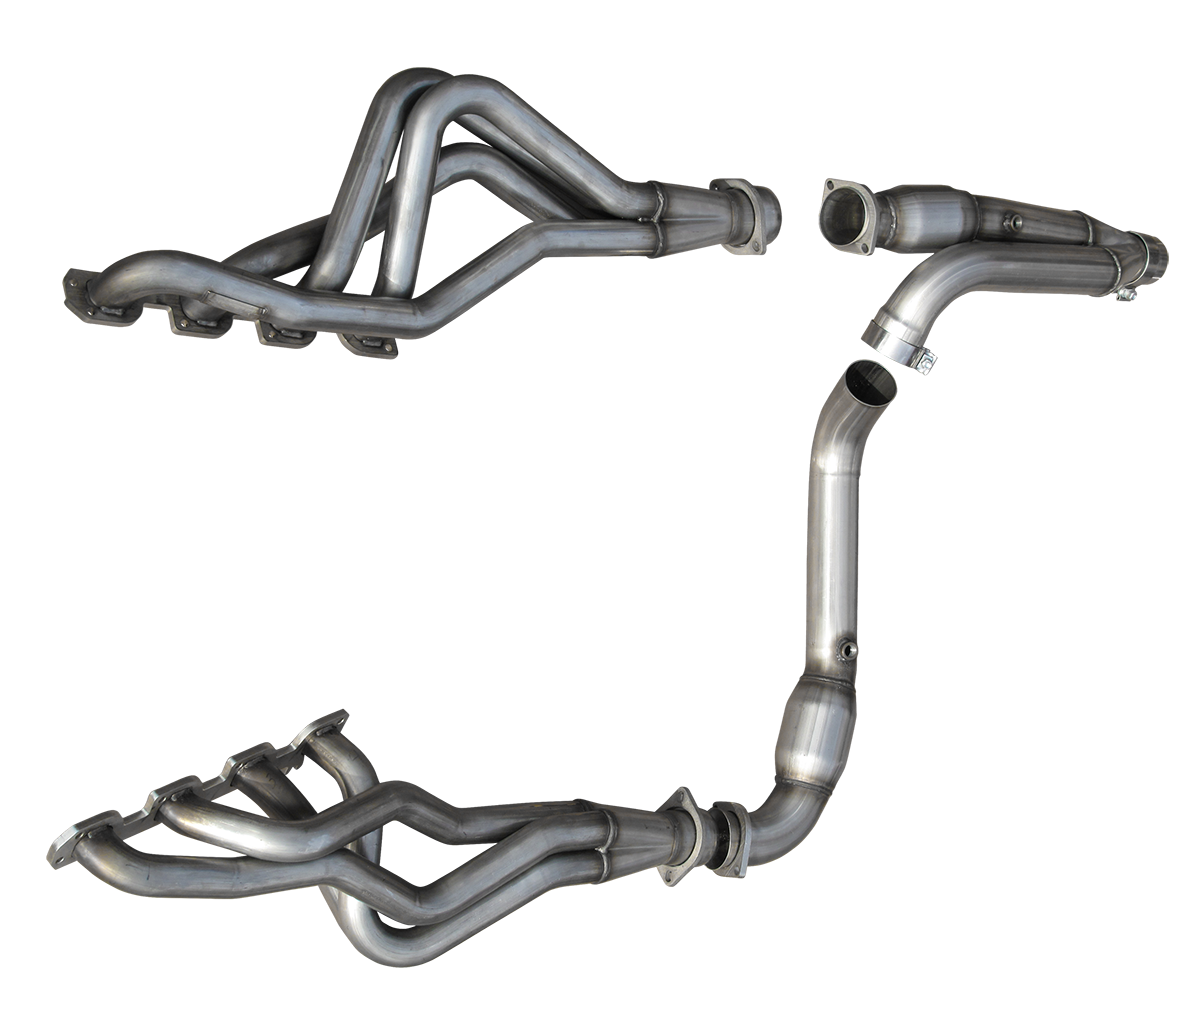 2006-2008 Dodge Ram 1500 American Racing Headers 1 3/4" x 3" Long Tube Headers w/3" Ypipe, Cats & Pure Thunder Exhaust System